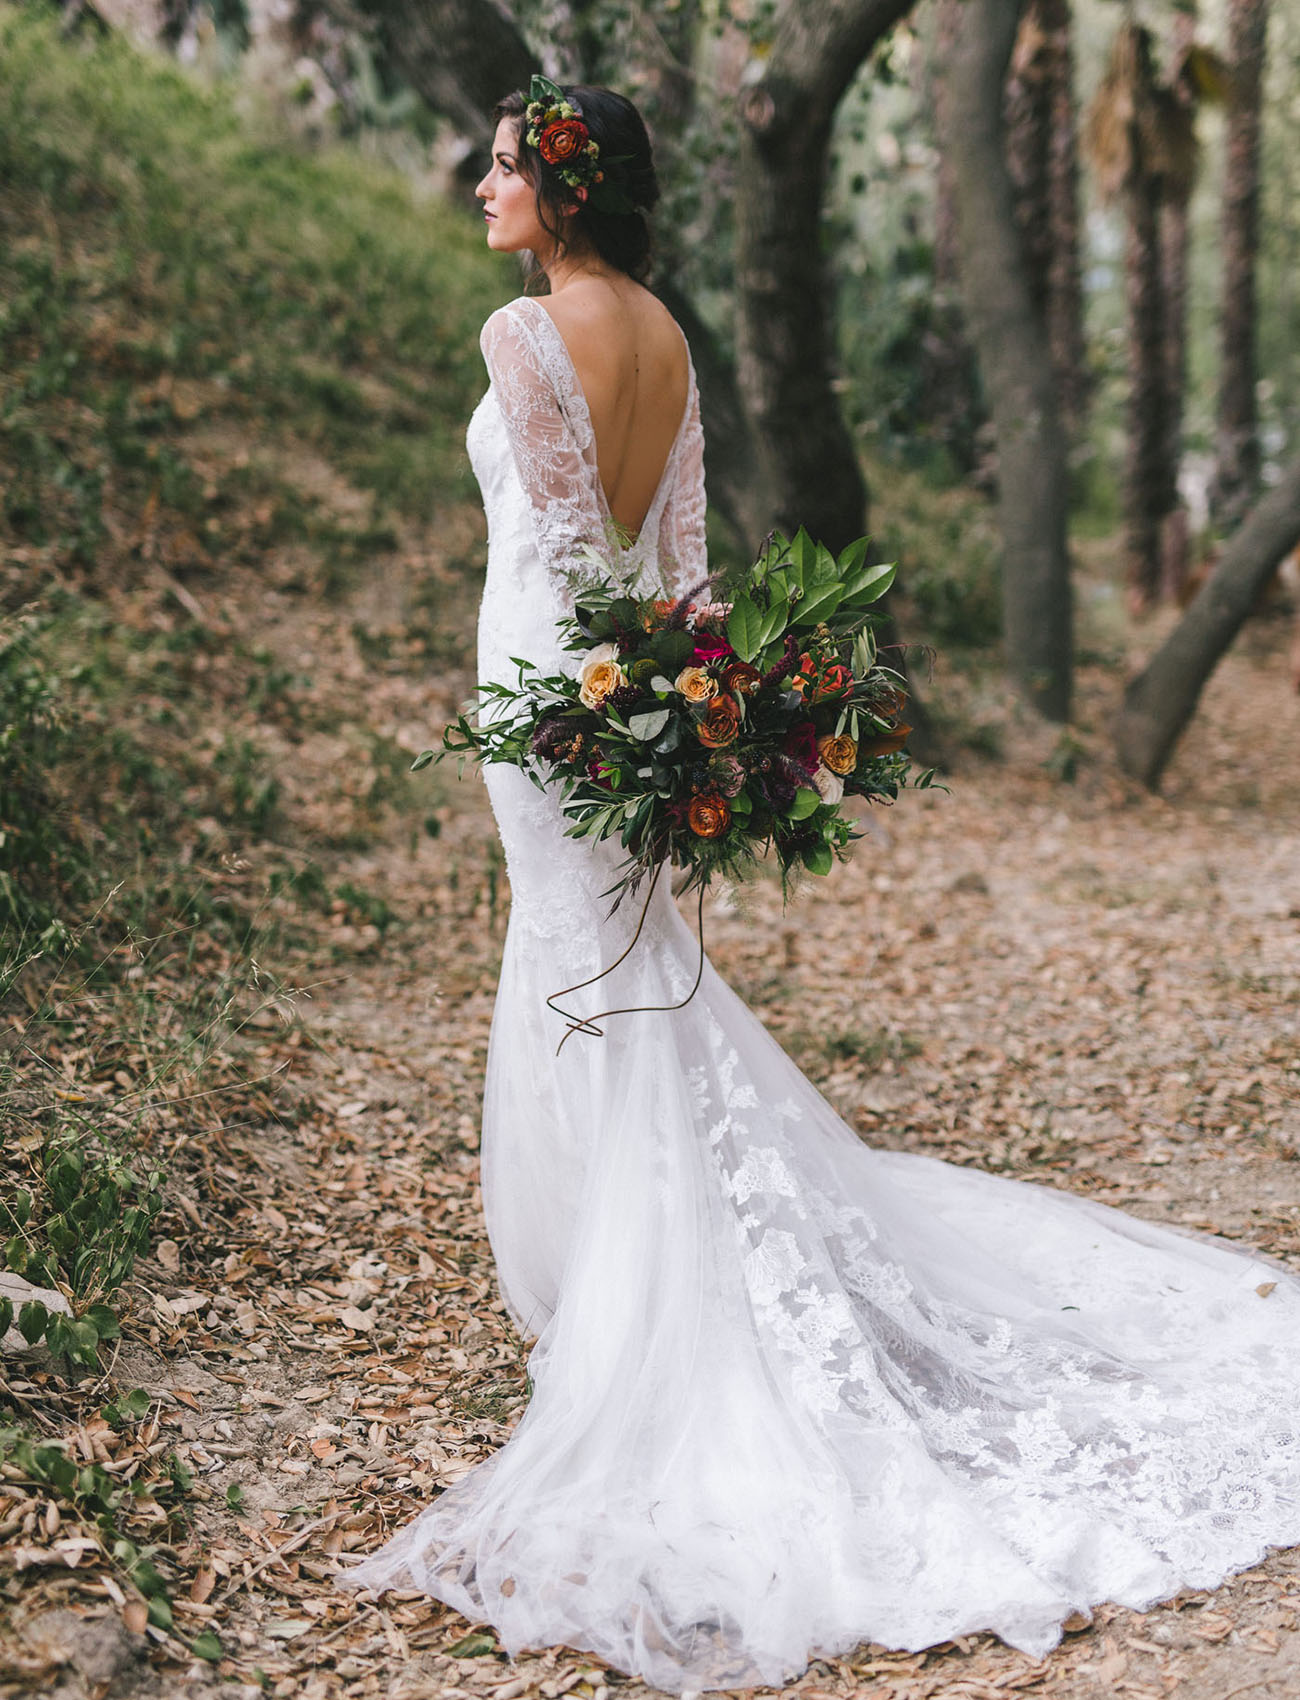 An open back and a train made the dress amazing, and a floral crown matching the bouquet was a moody flal one